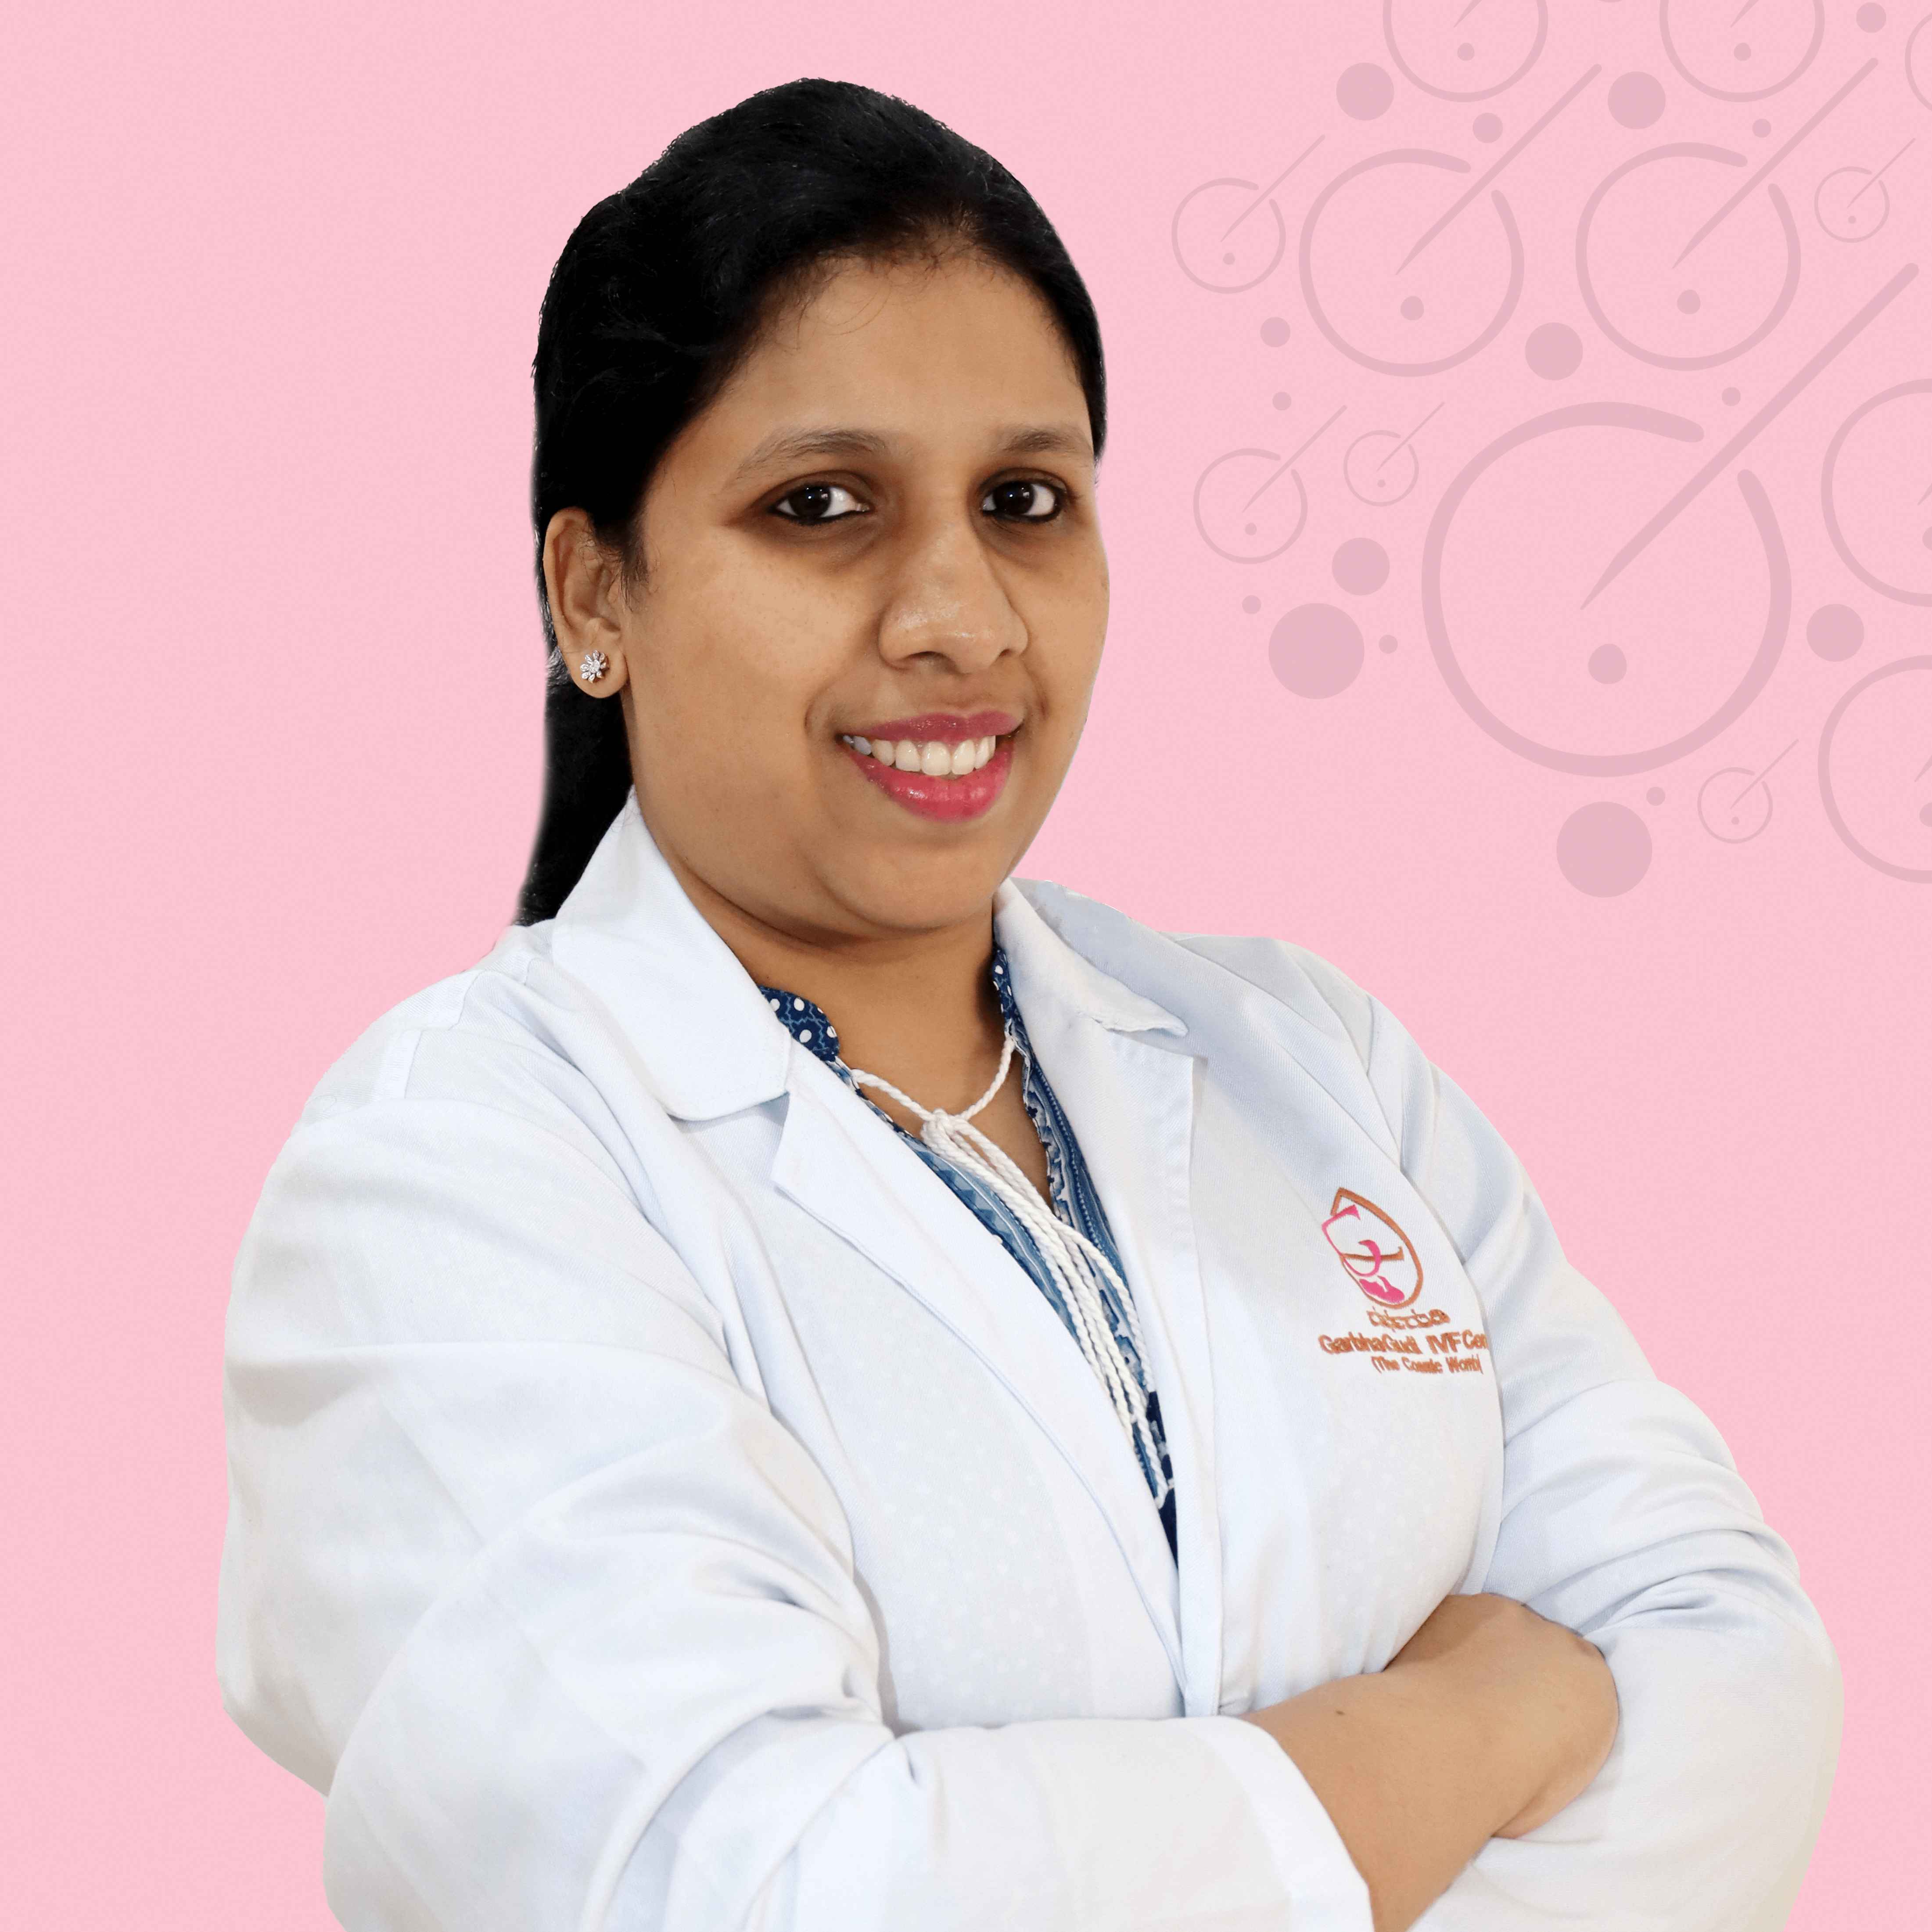 IVF Specialist in Bangalore - Dr Nikitha Murthy